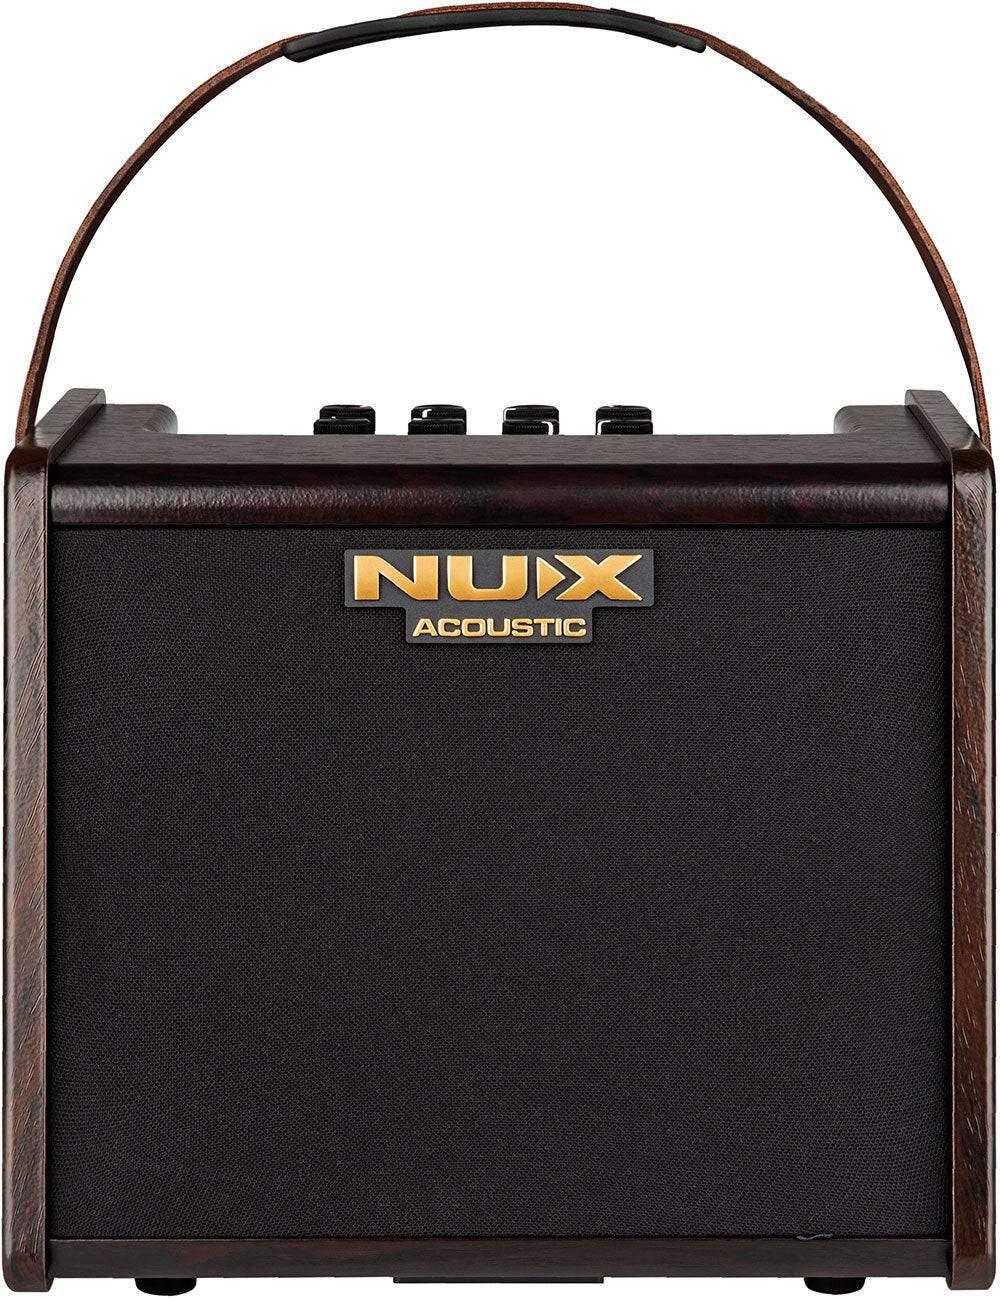 NU-X AC25 STAGEMAN 2-CHANNEL, 25W BATTERY OPERATED ACOUSTIC AMPLIFIER - Joondalup Music Centre